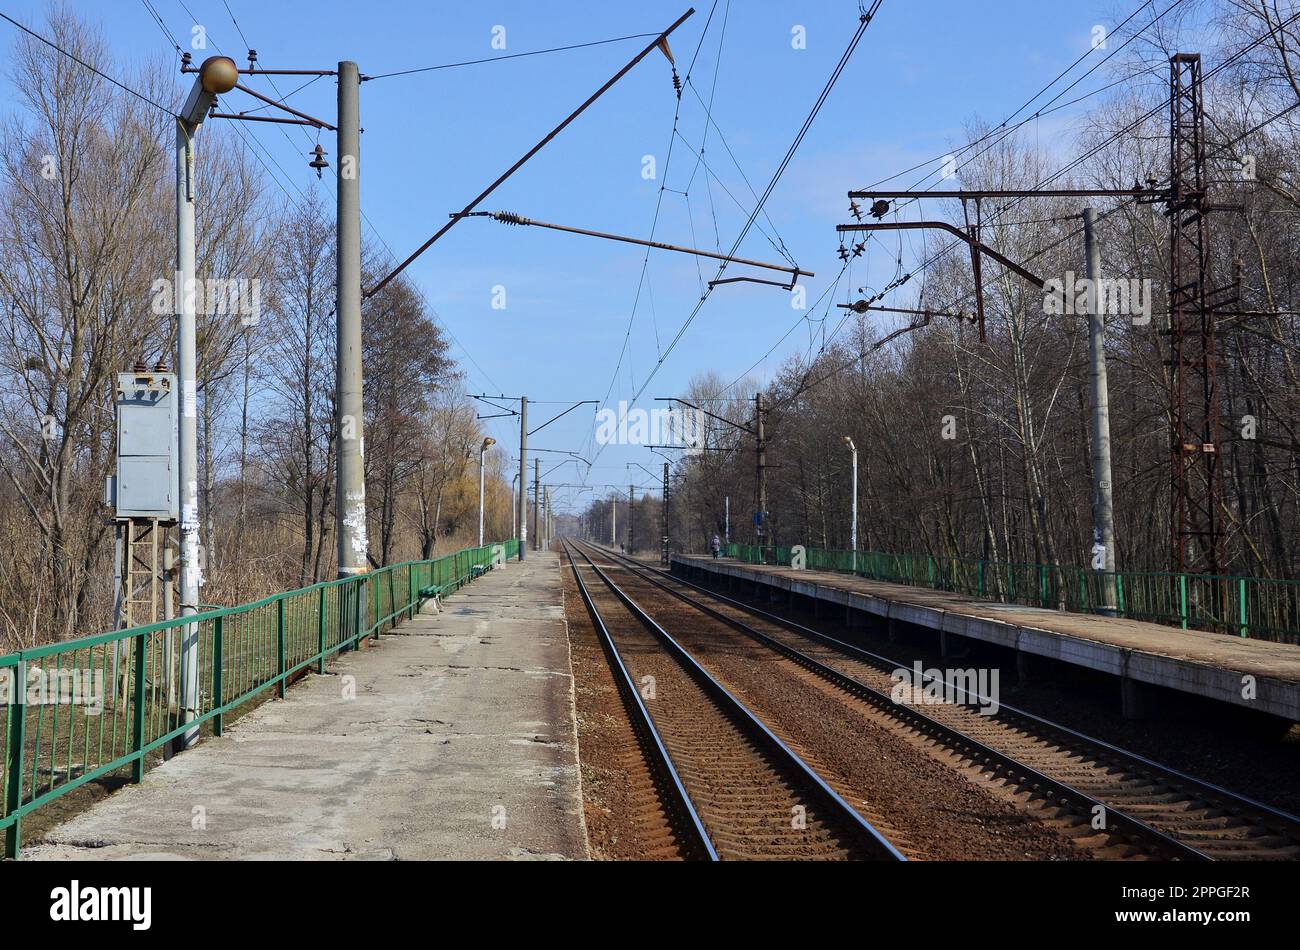 A railway station with platforms for waiting for trains Stock Photo